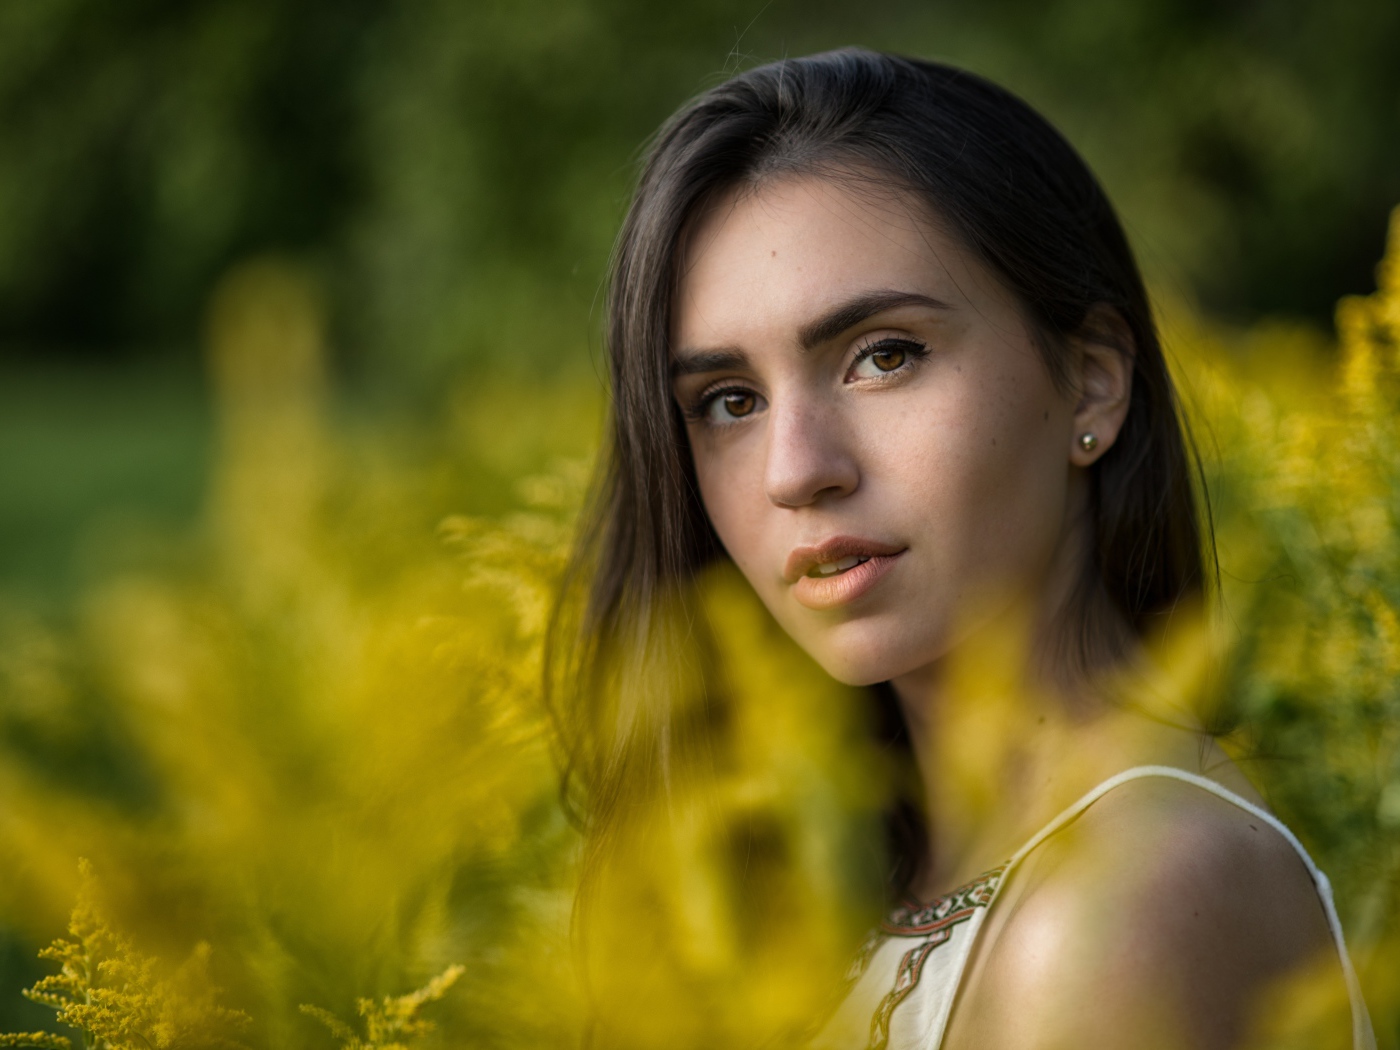 A beautiful girl with a tender gaze sits at the yellow flowers